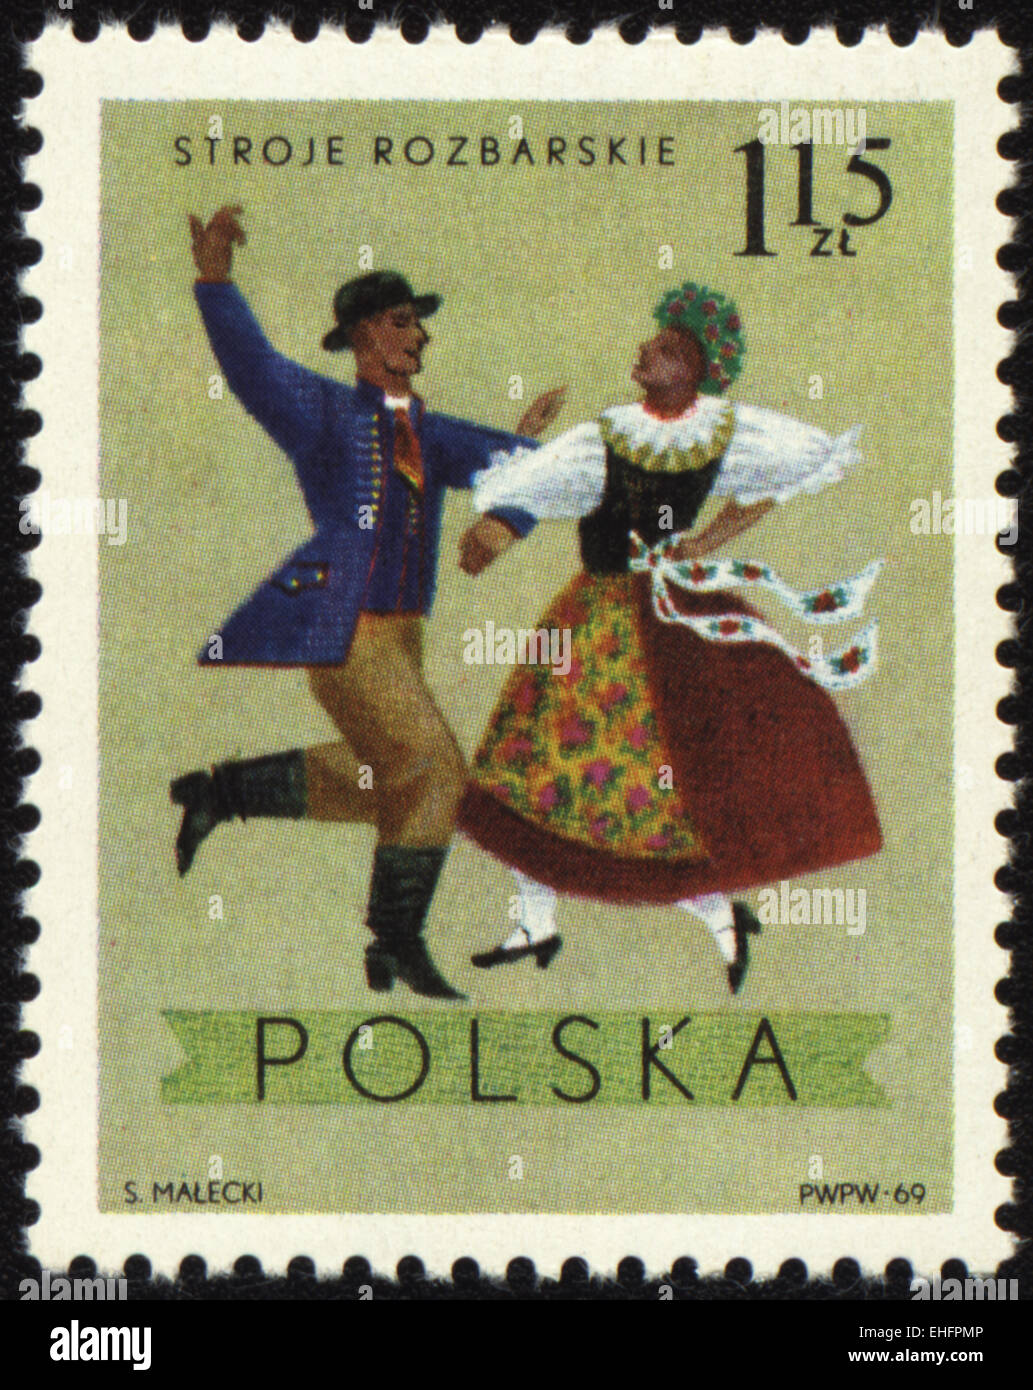 POLAND - CIRCA 1969: A stamp printed in Poland shows polish folk dancers in costumes from Rozbarskie region Stock Photo